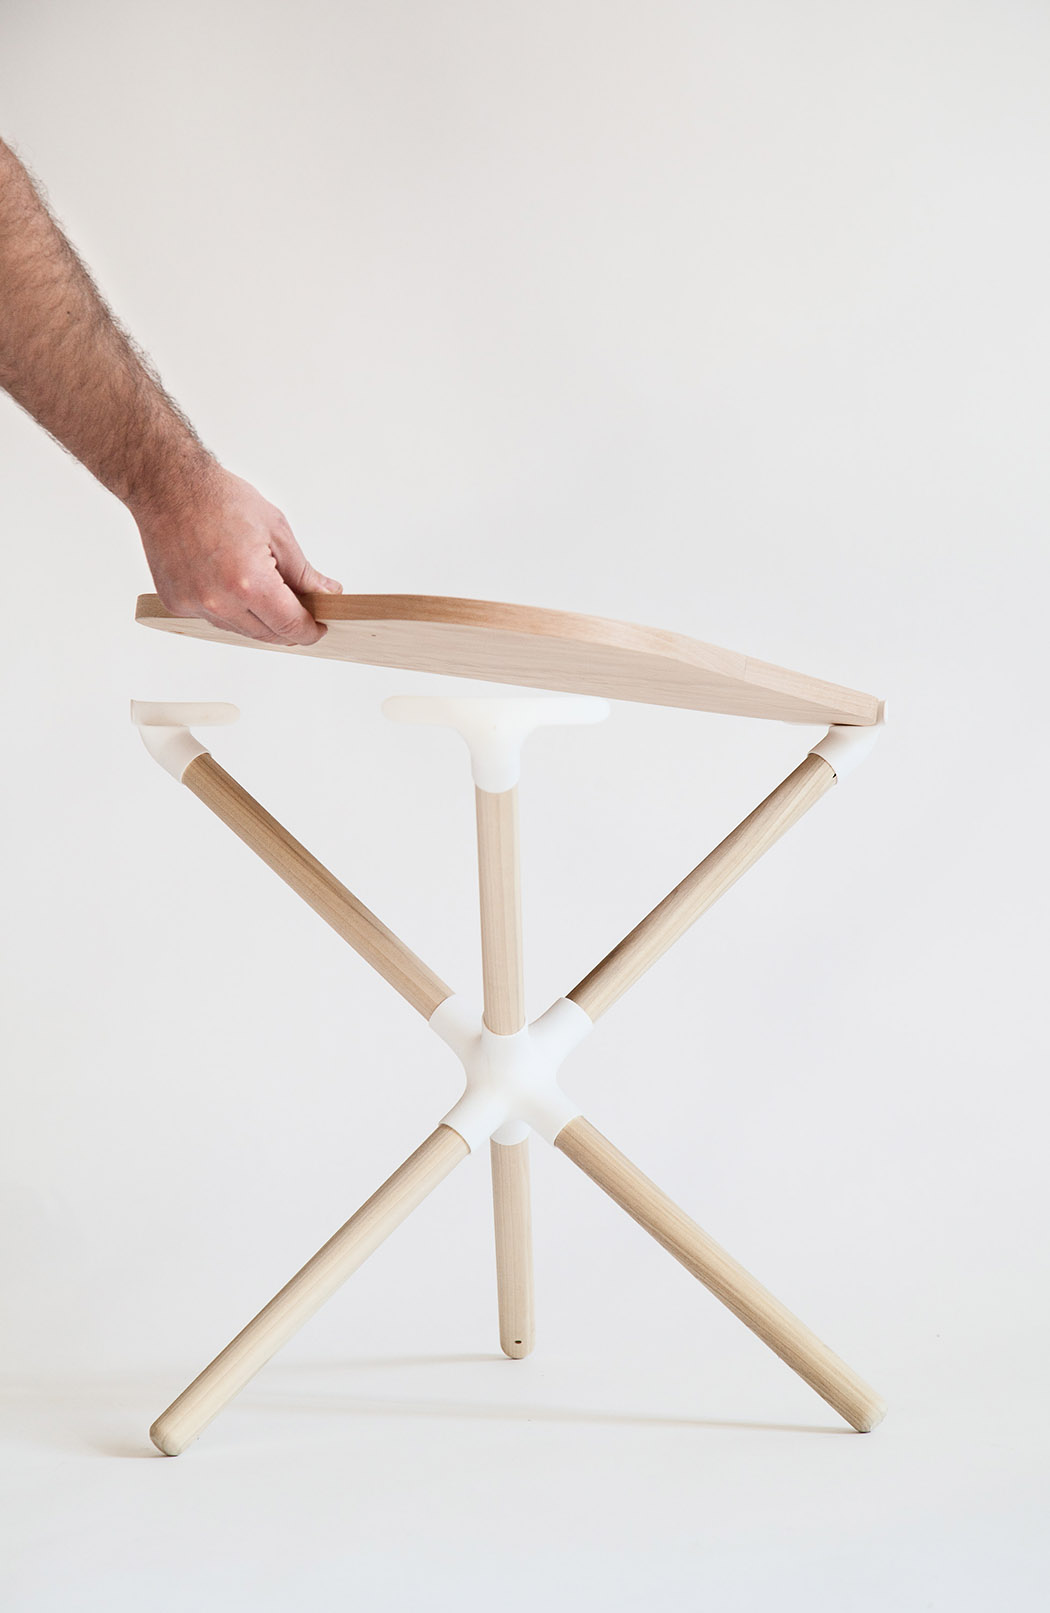 Create your own coffee table using the parts and white joints